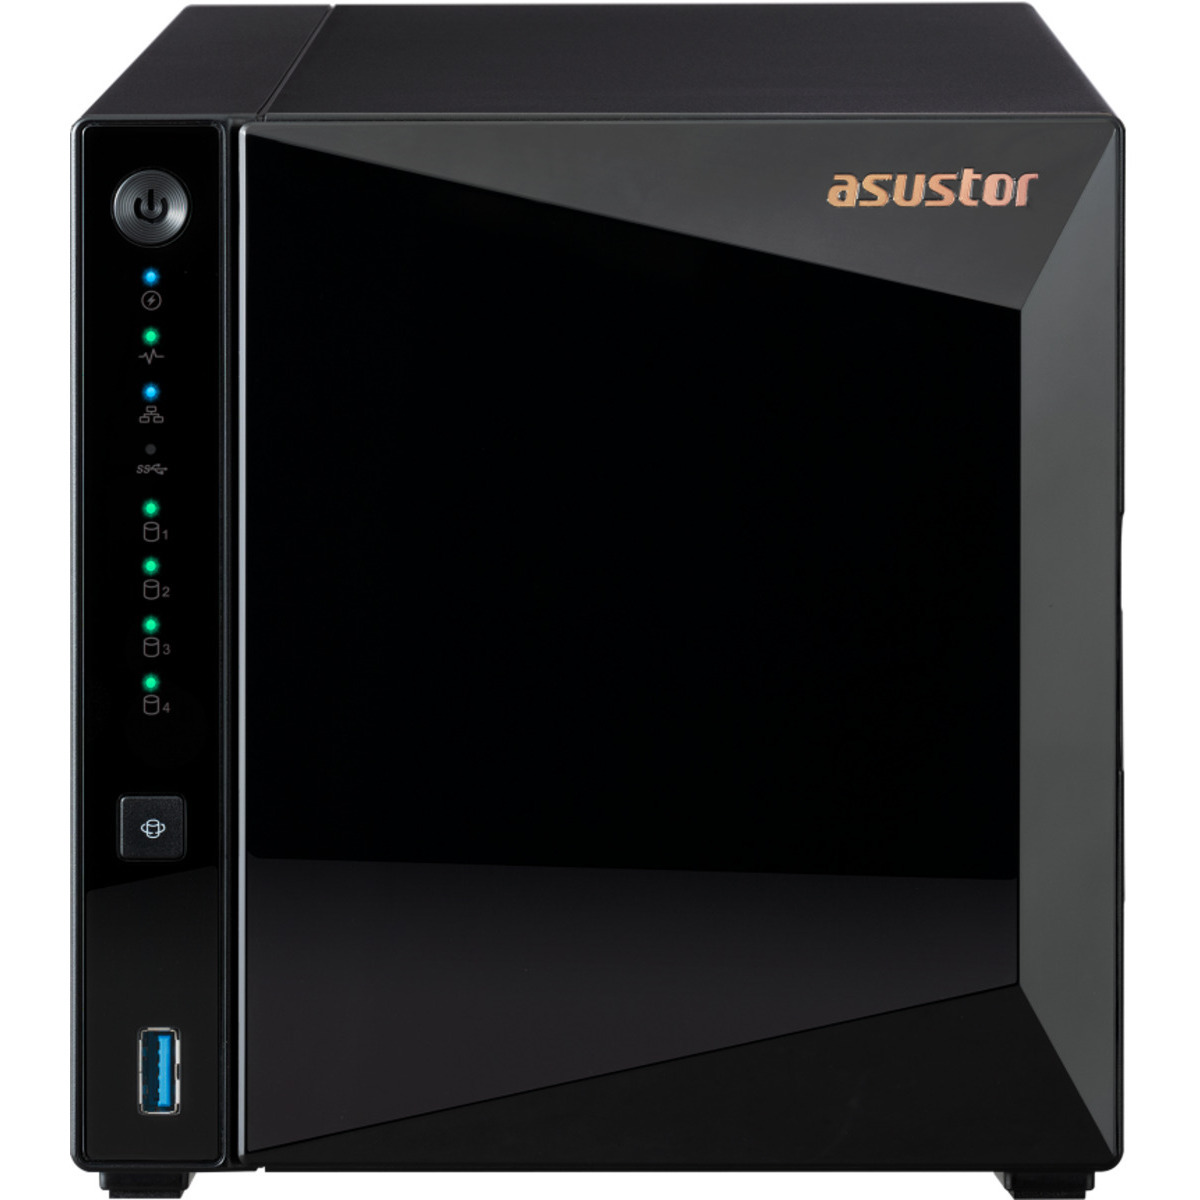 ASUSTOR DRIVESTOR 4 Pro AS3304T 72tb 4-Bay Desktop Personal / Basic Home / Small Office NAS - Network Attached Storage Device 4x18tb Seagate EXOS X18 ST18000NM000J 3.5 7200rpm SATA 6Gb/s HDD ENTERPRISE Class Drives Installed - Burn-In Tested DRIVESTOR 4 Pro AS3304T